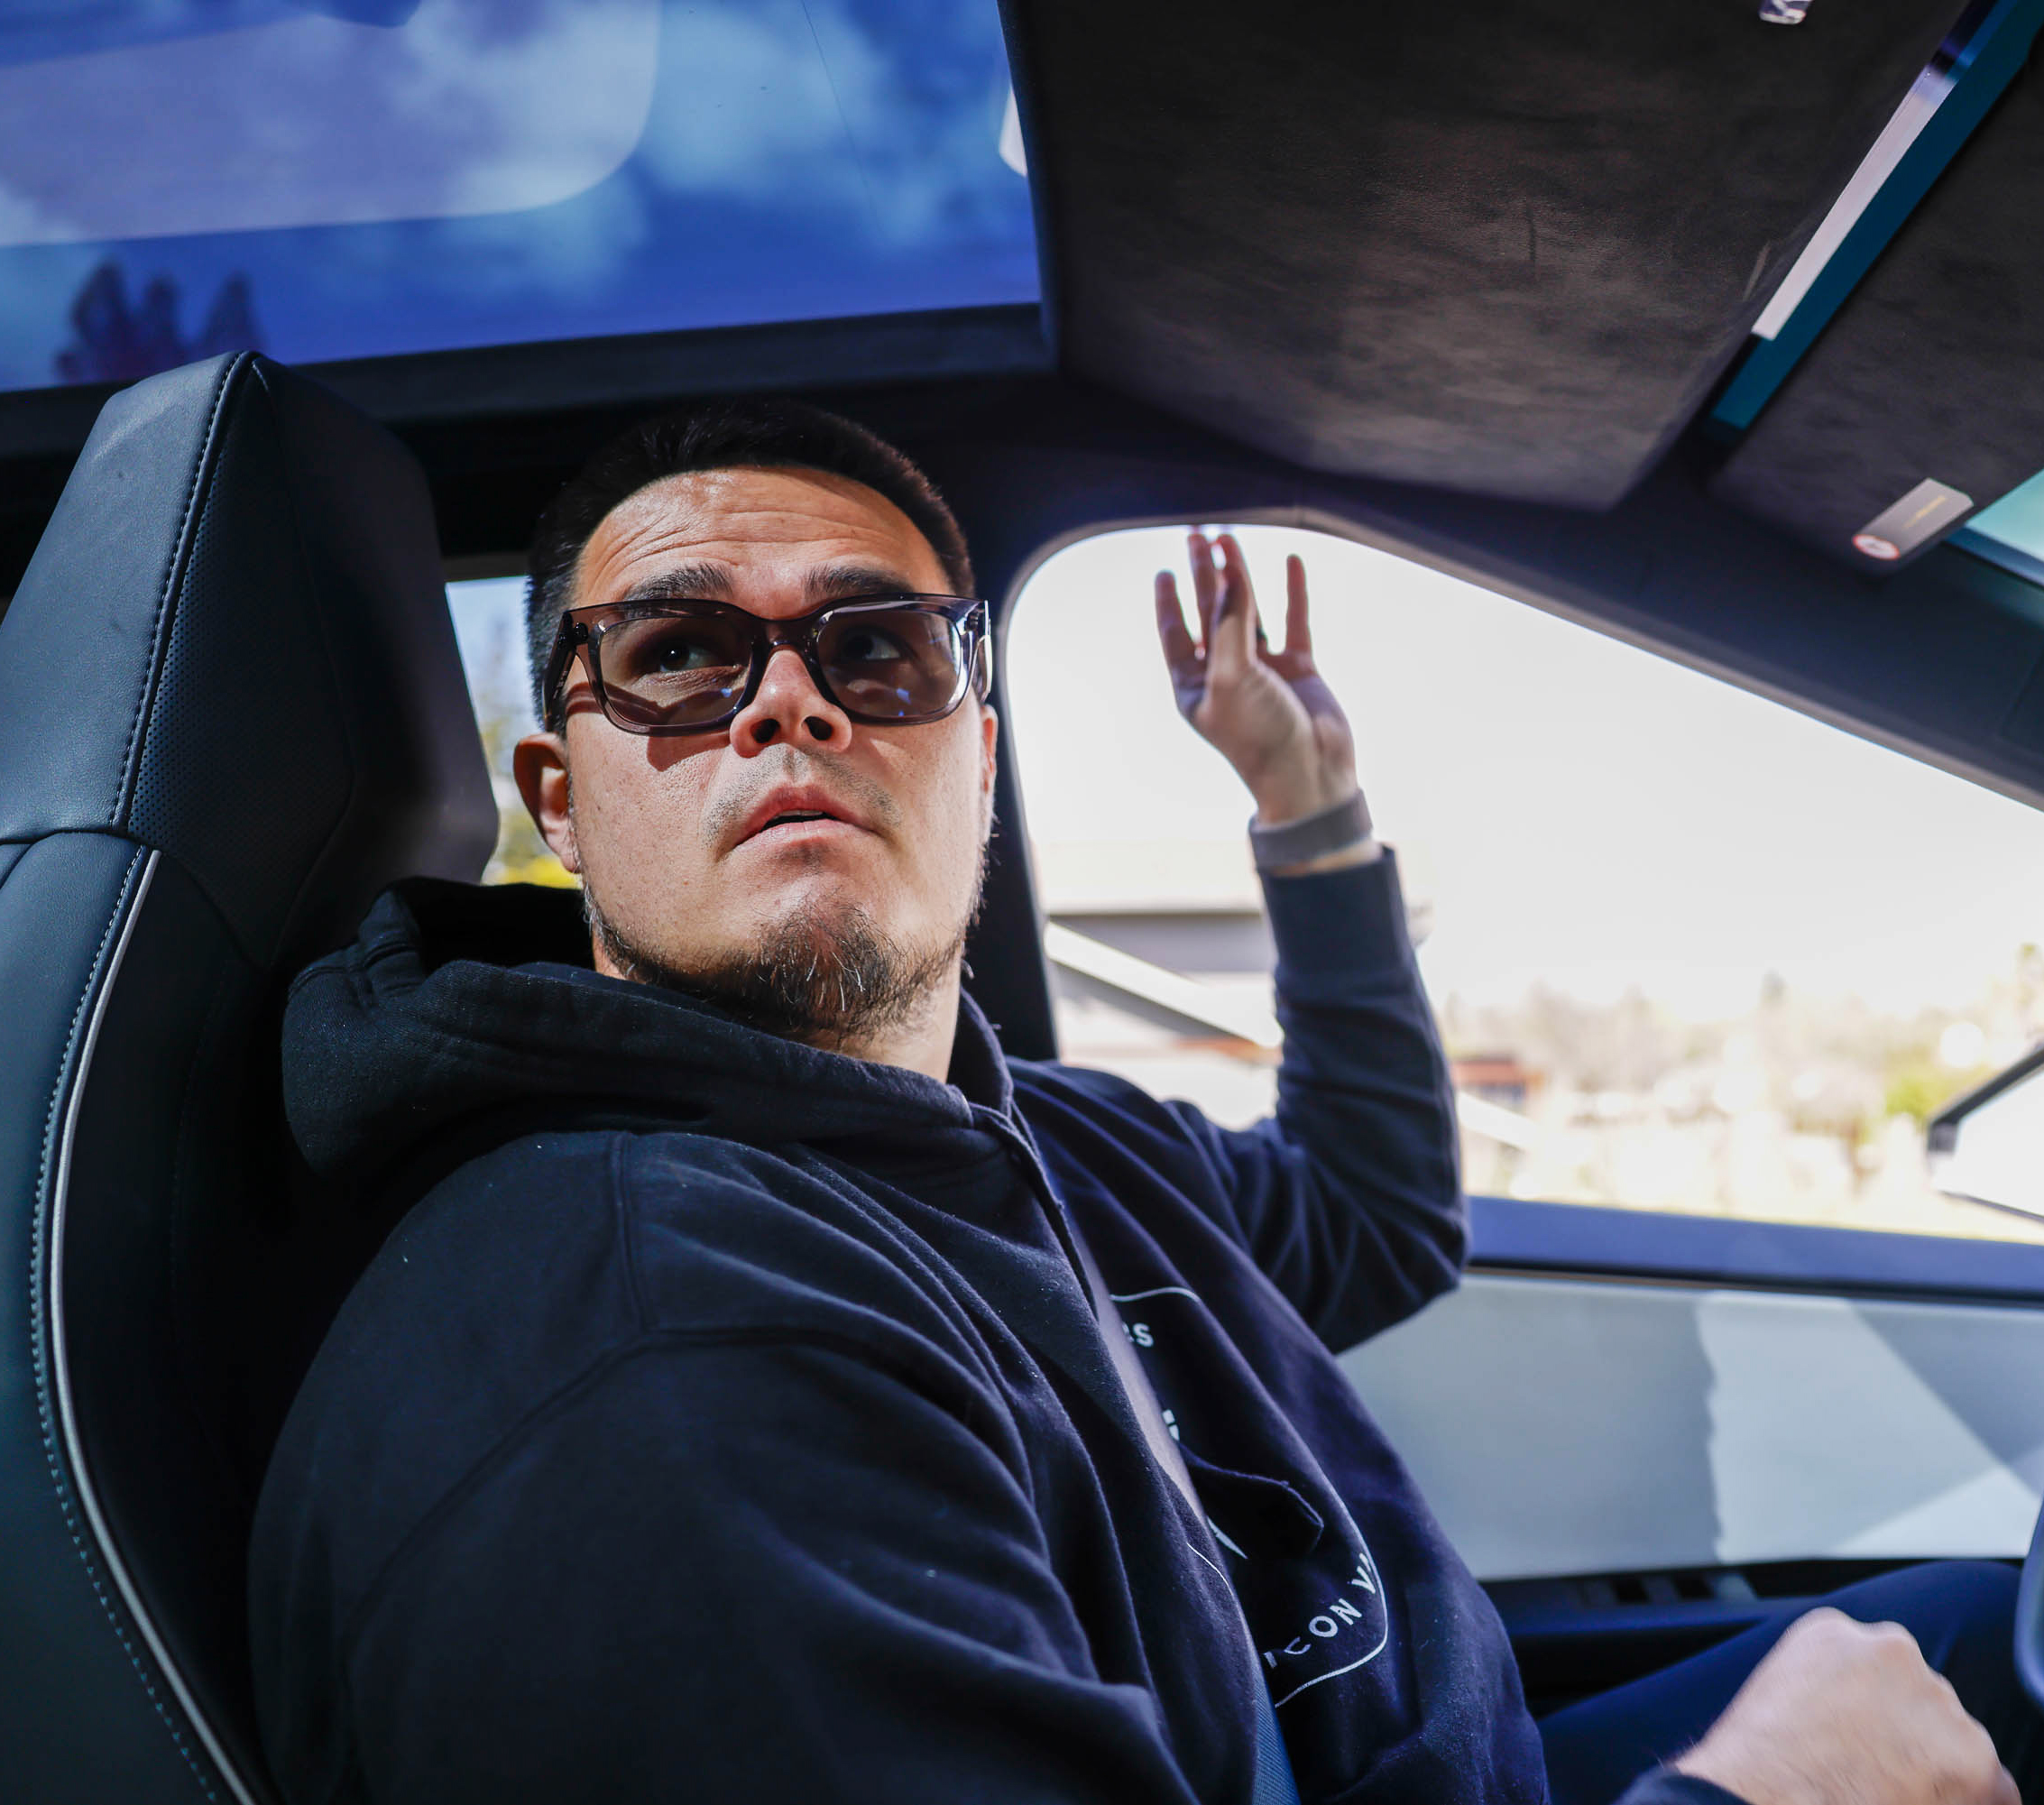 A man in sunglasses gestures inside a car with a sunroof, looking intently at the camera.